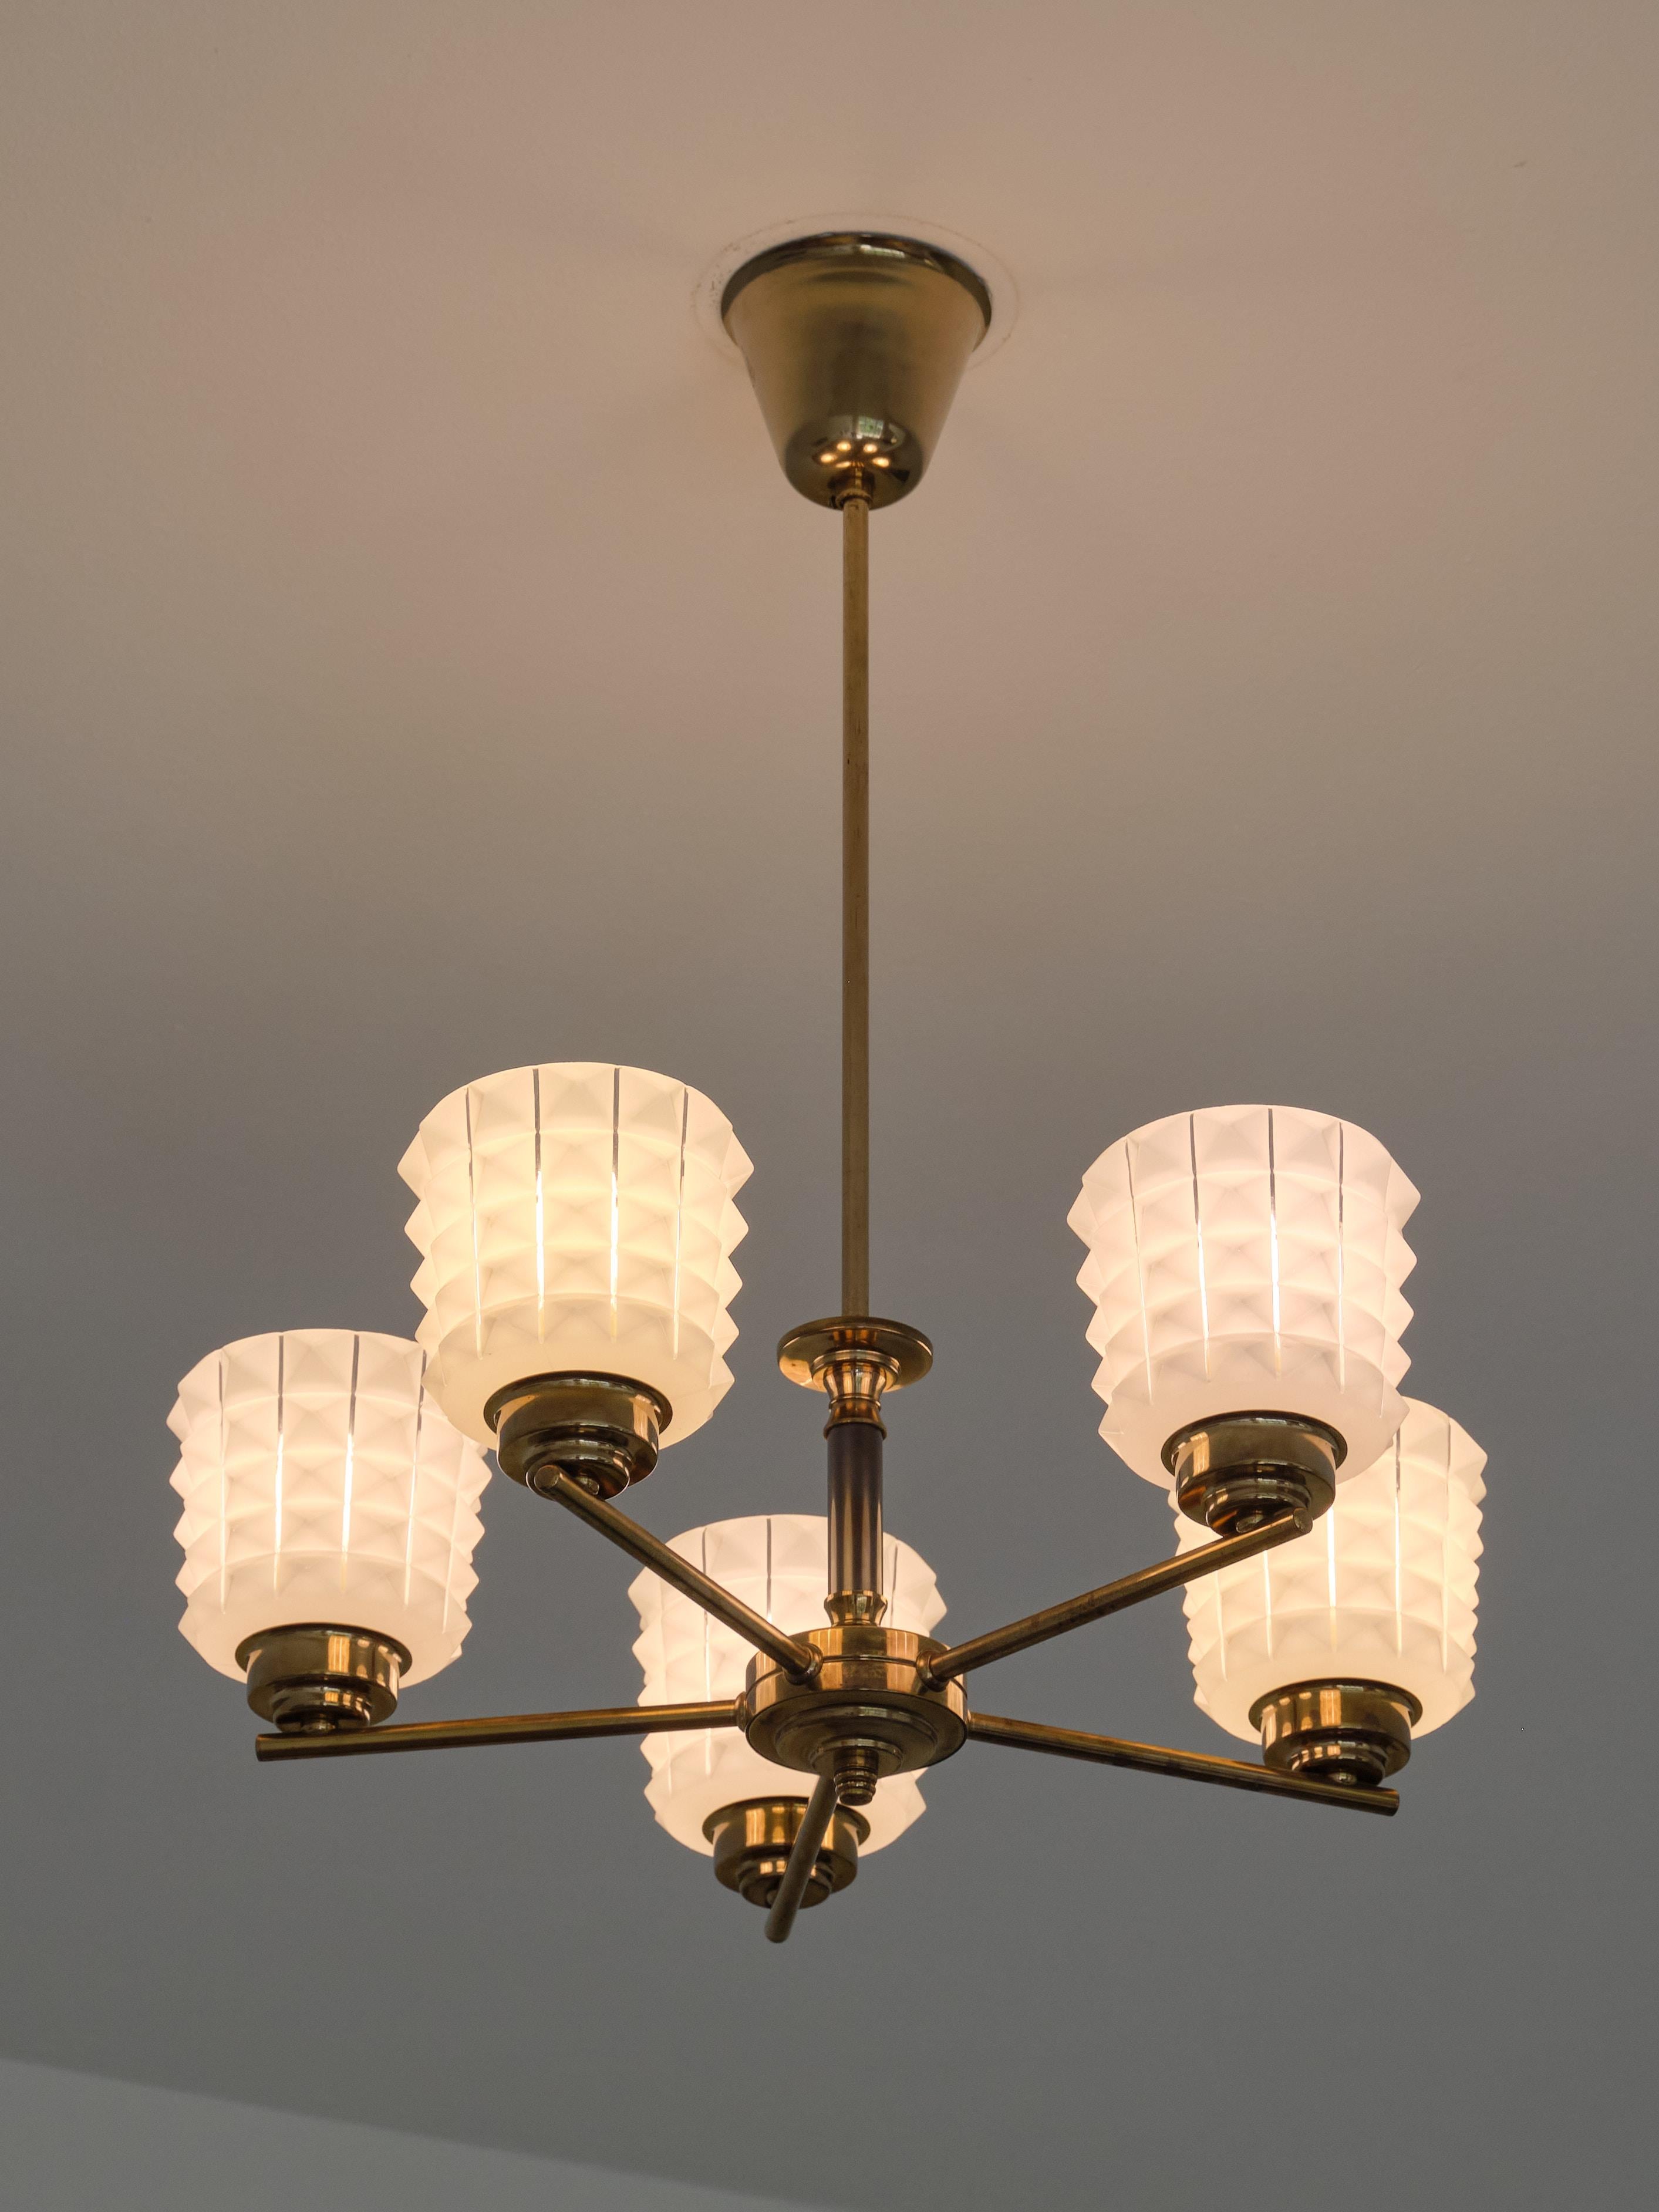 Swedish Modern Five Arm Chandelier in Brass and Studded Opal Glass, 1950s For Sale 1